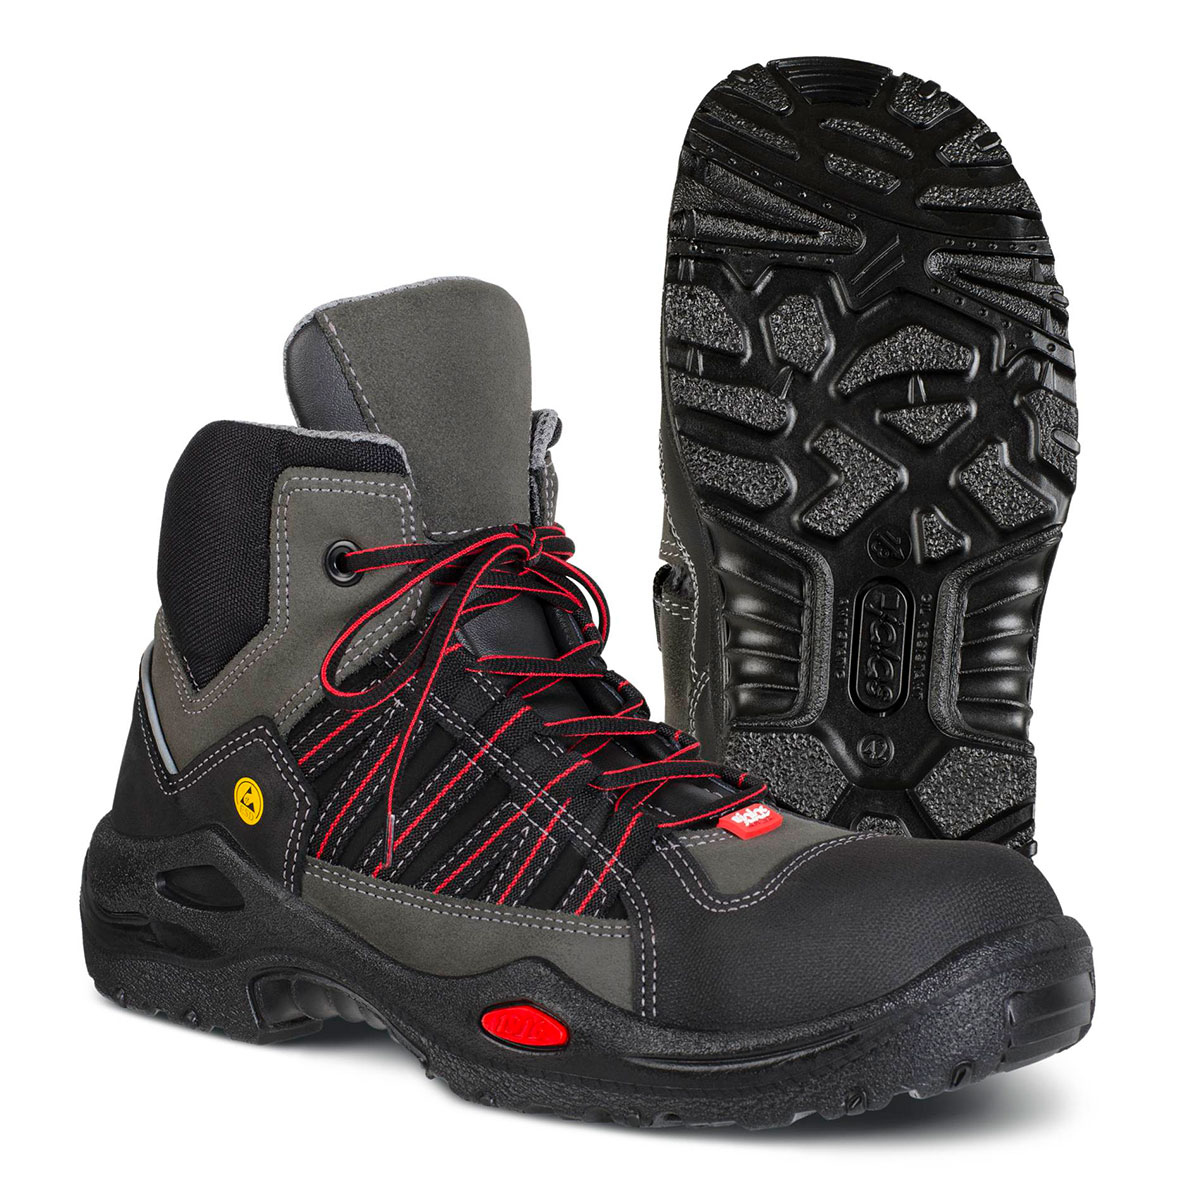 JALAS® 1625 by Ejendals: "E-SPORT" - Lightweight, Flexible & Innovative Gen. Purpose In/Outdoor S3 Full Safety Boot